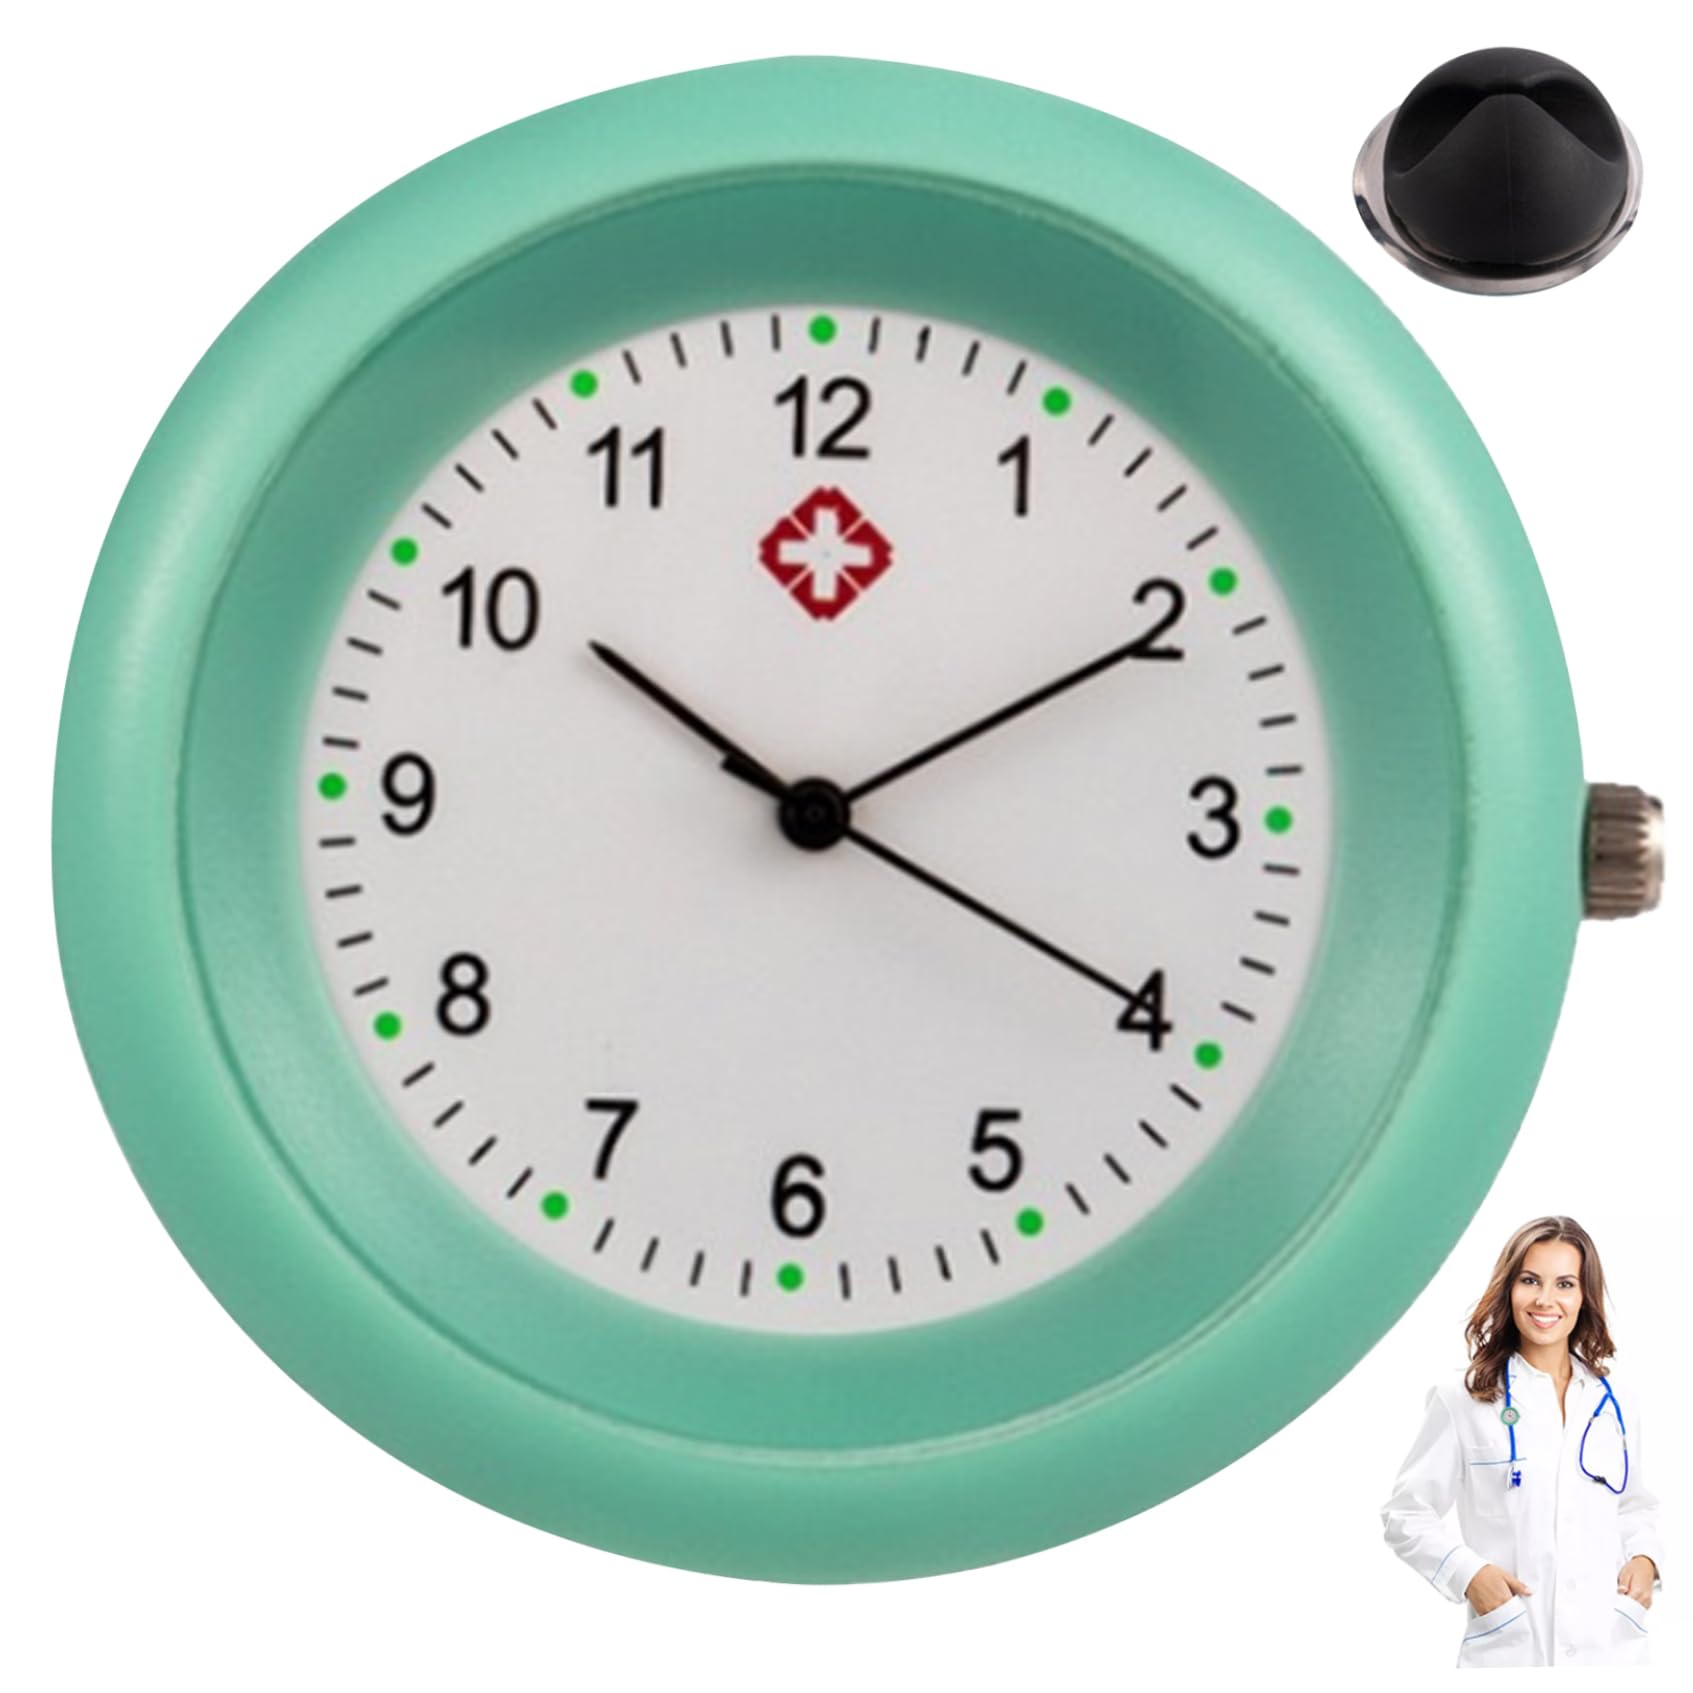 Fob Watches for Nurses Clip on Waterproof Nurse Watch for Stethoscope Attachment Accurate Pocket Watch with Clear Scale Nurse Watch Fob for Nurse Gifts